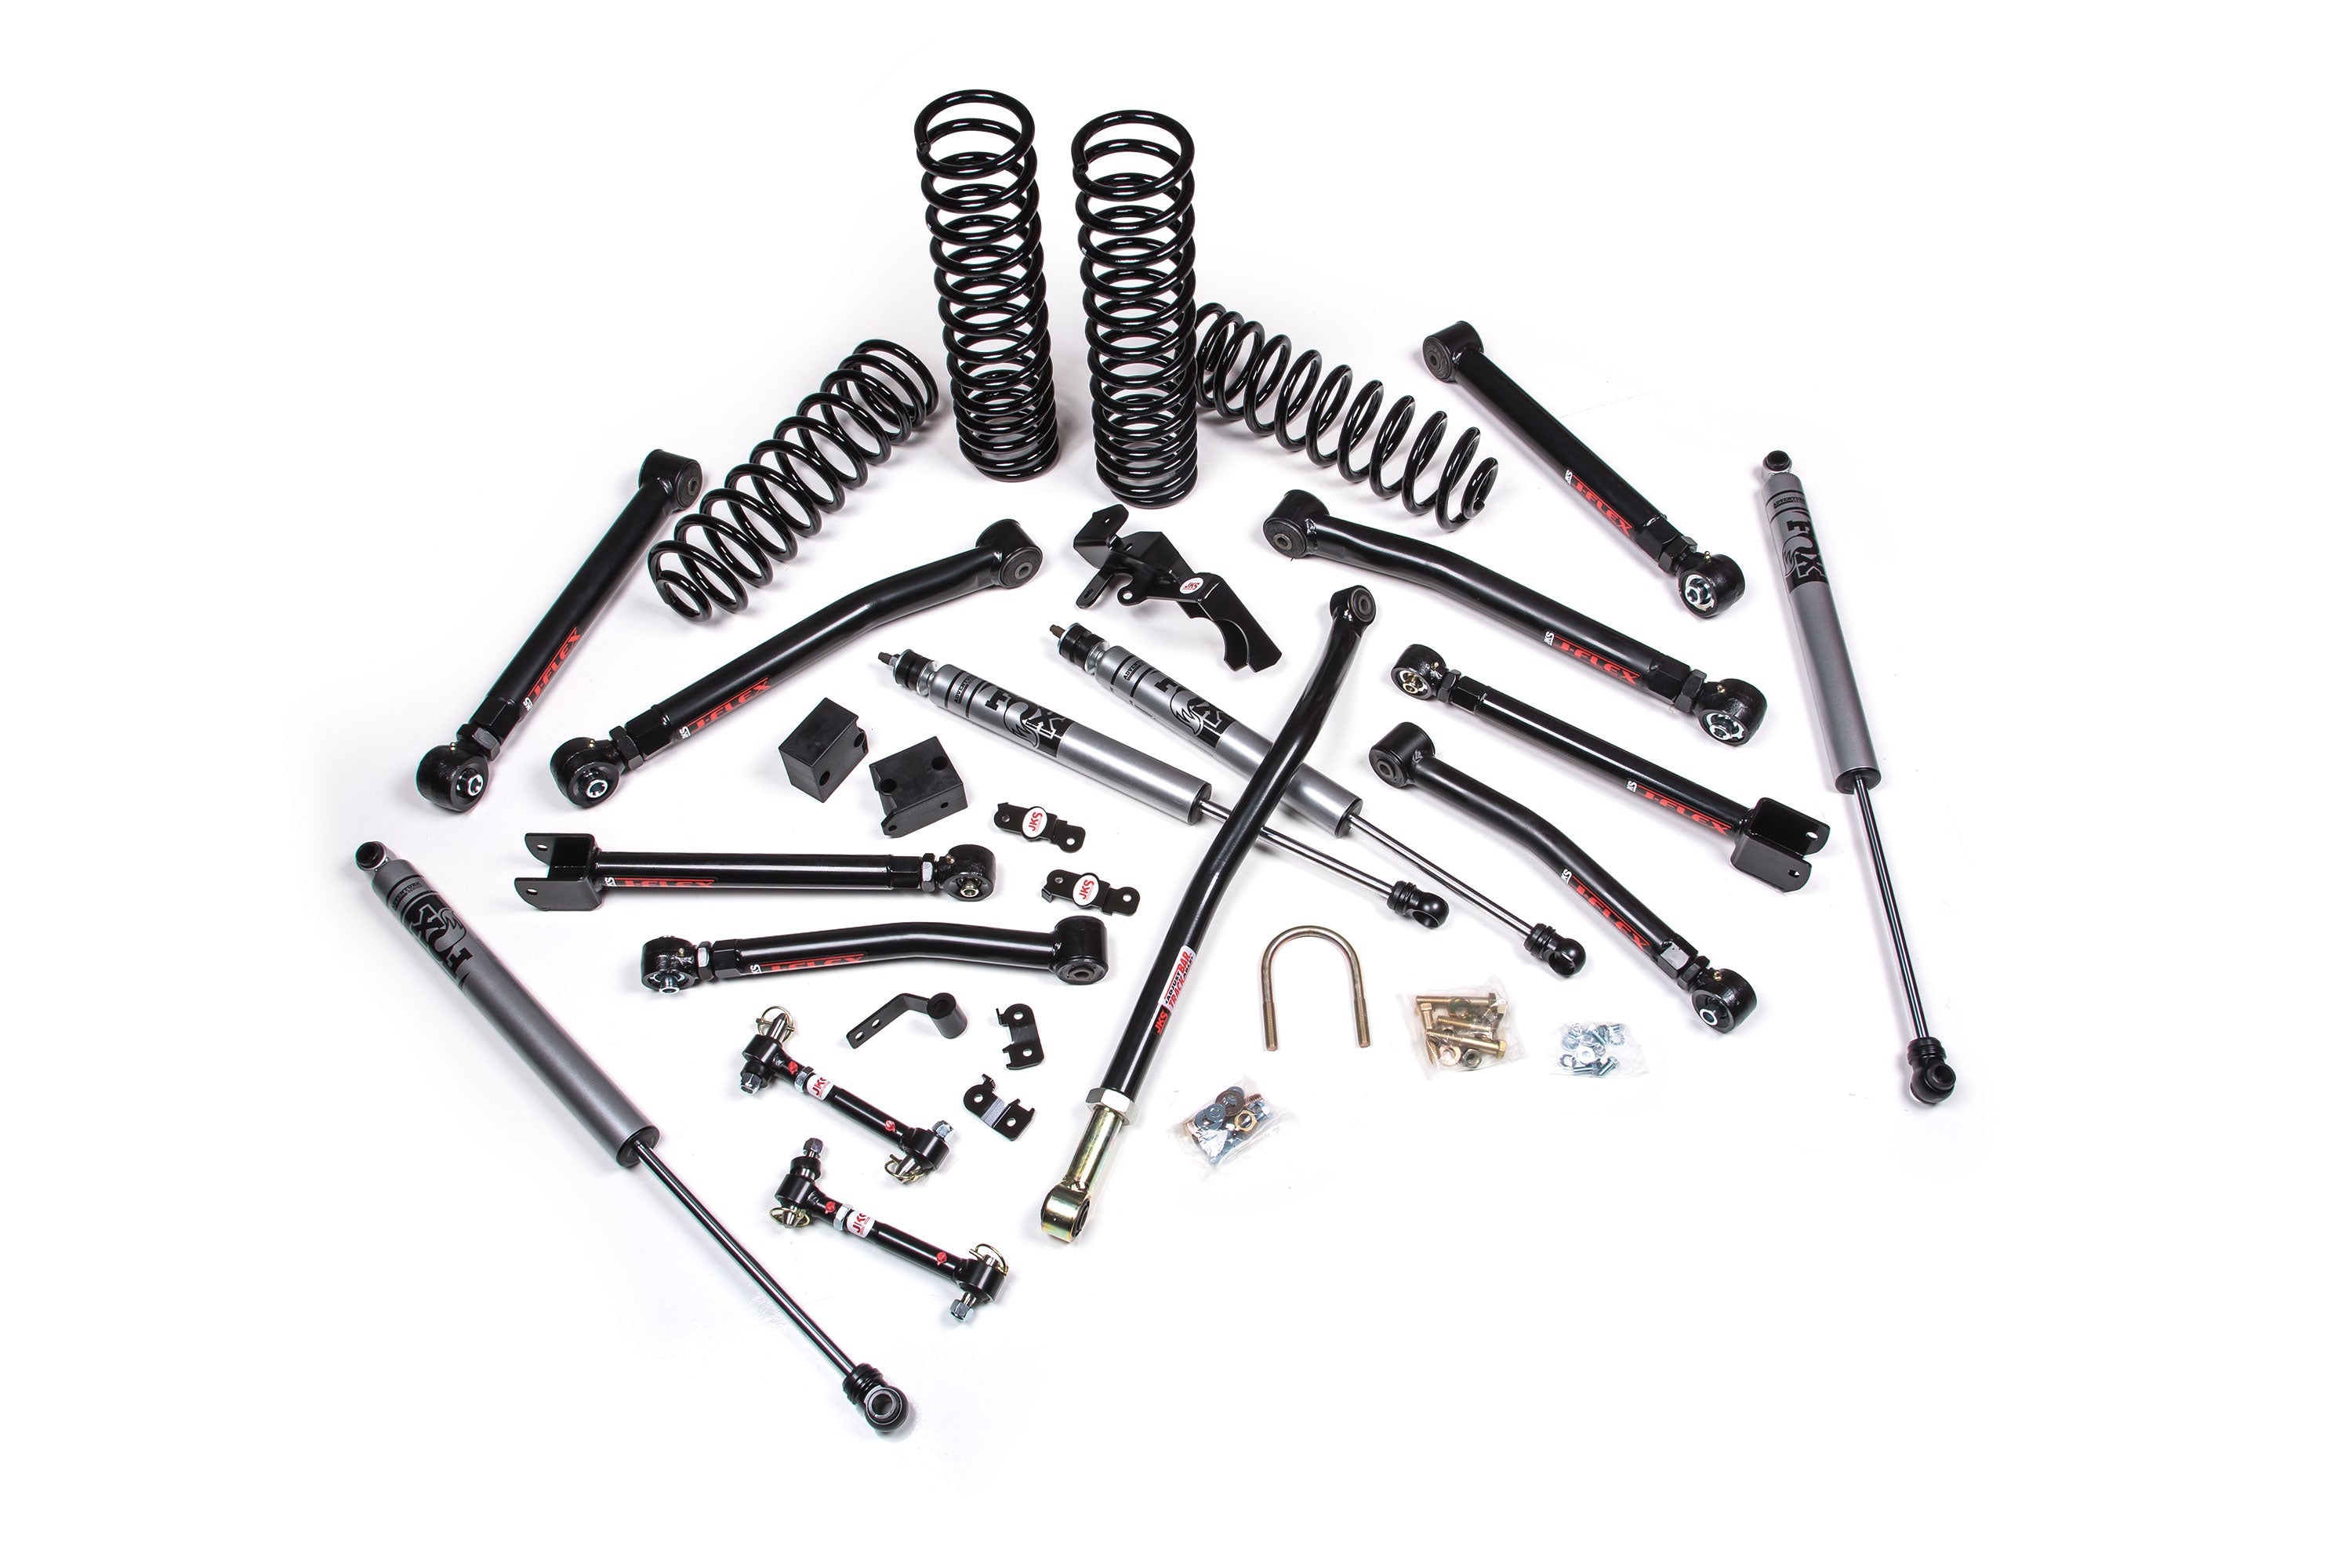 Enhance your off-road adventures with our JKS 2.5 Inch Jeep Wrangler JK (06-18) 4 Door J-Krawl Lift Kit from the brand JKS. Designed to maximize offroad articulation, our kit ensures superior performance and durability. Combined with our top